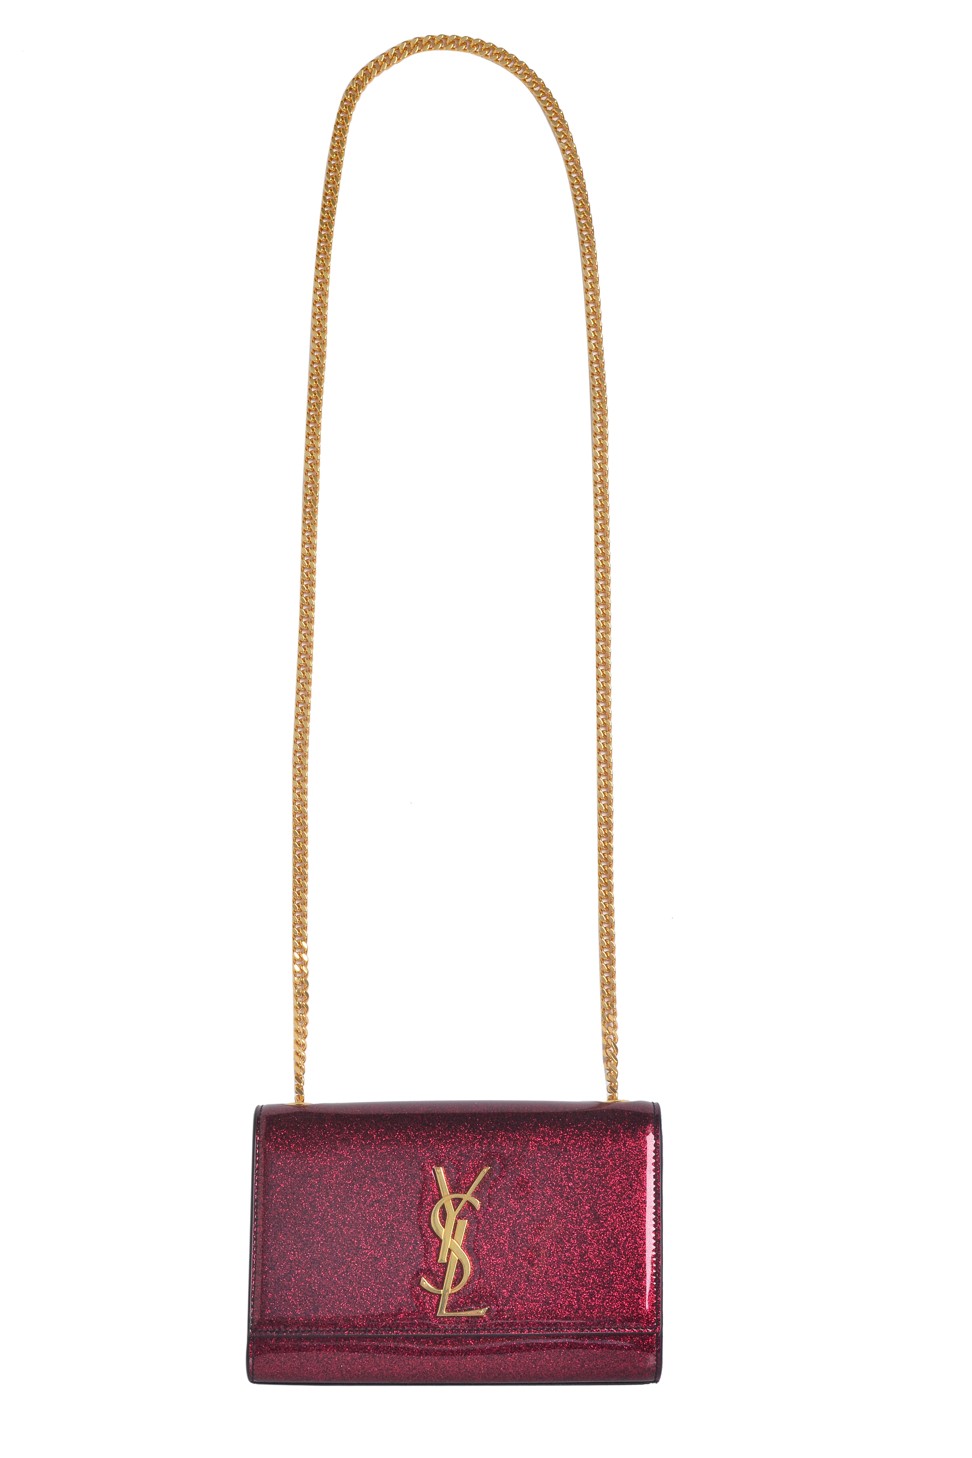 The Saint Laurent Kate chain bag in red glitter leather costs US$1,820.